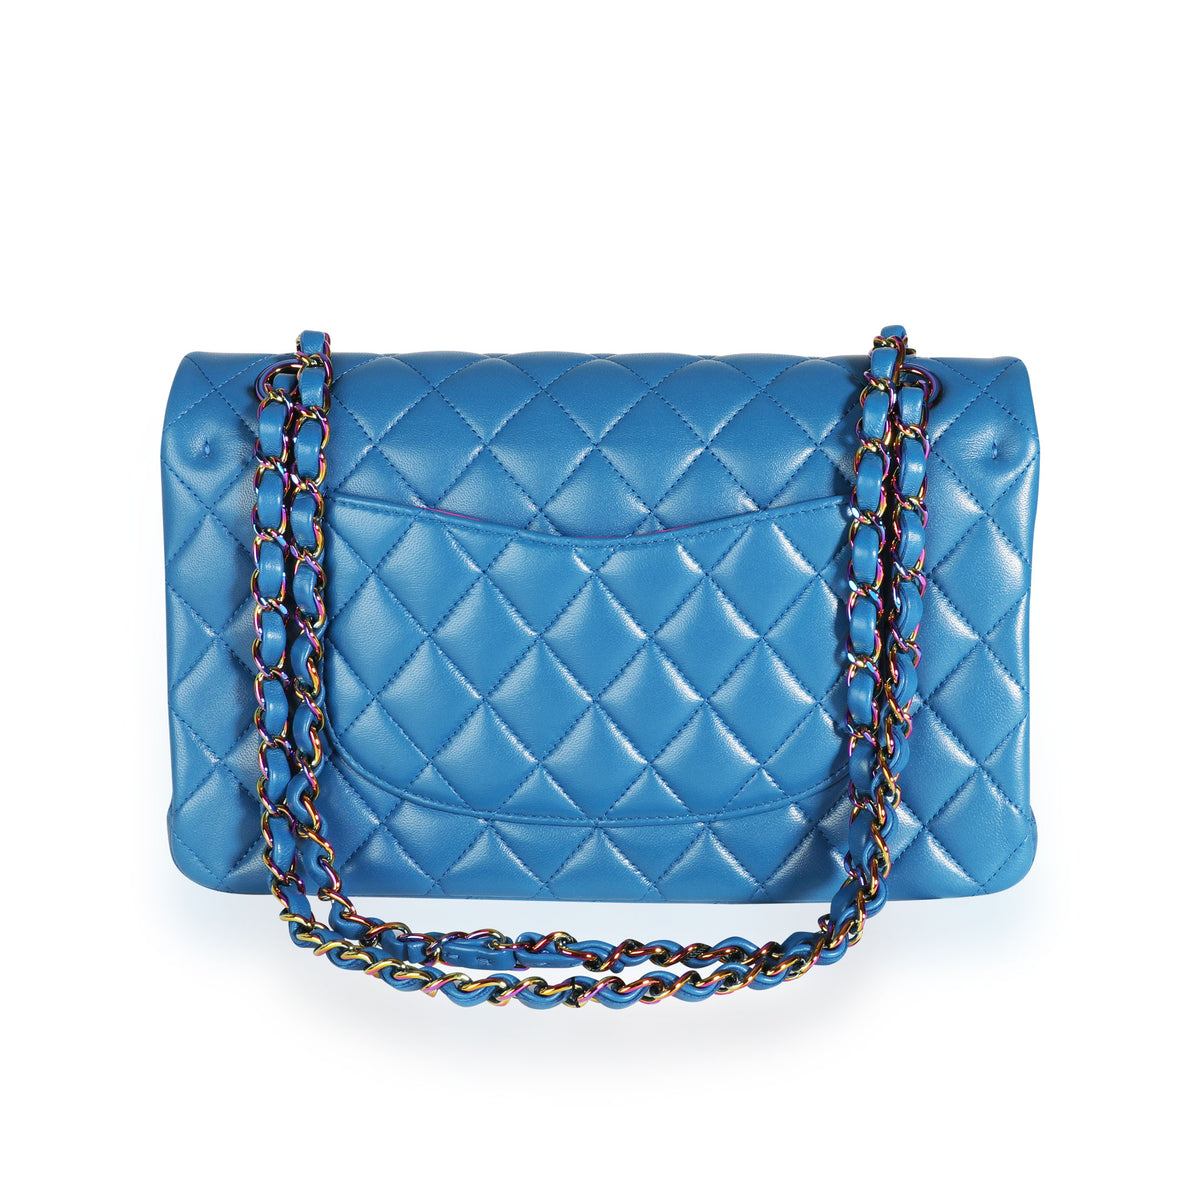 blue the chanel product